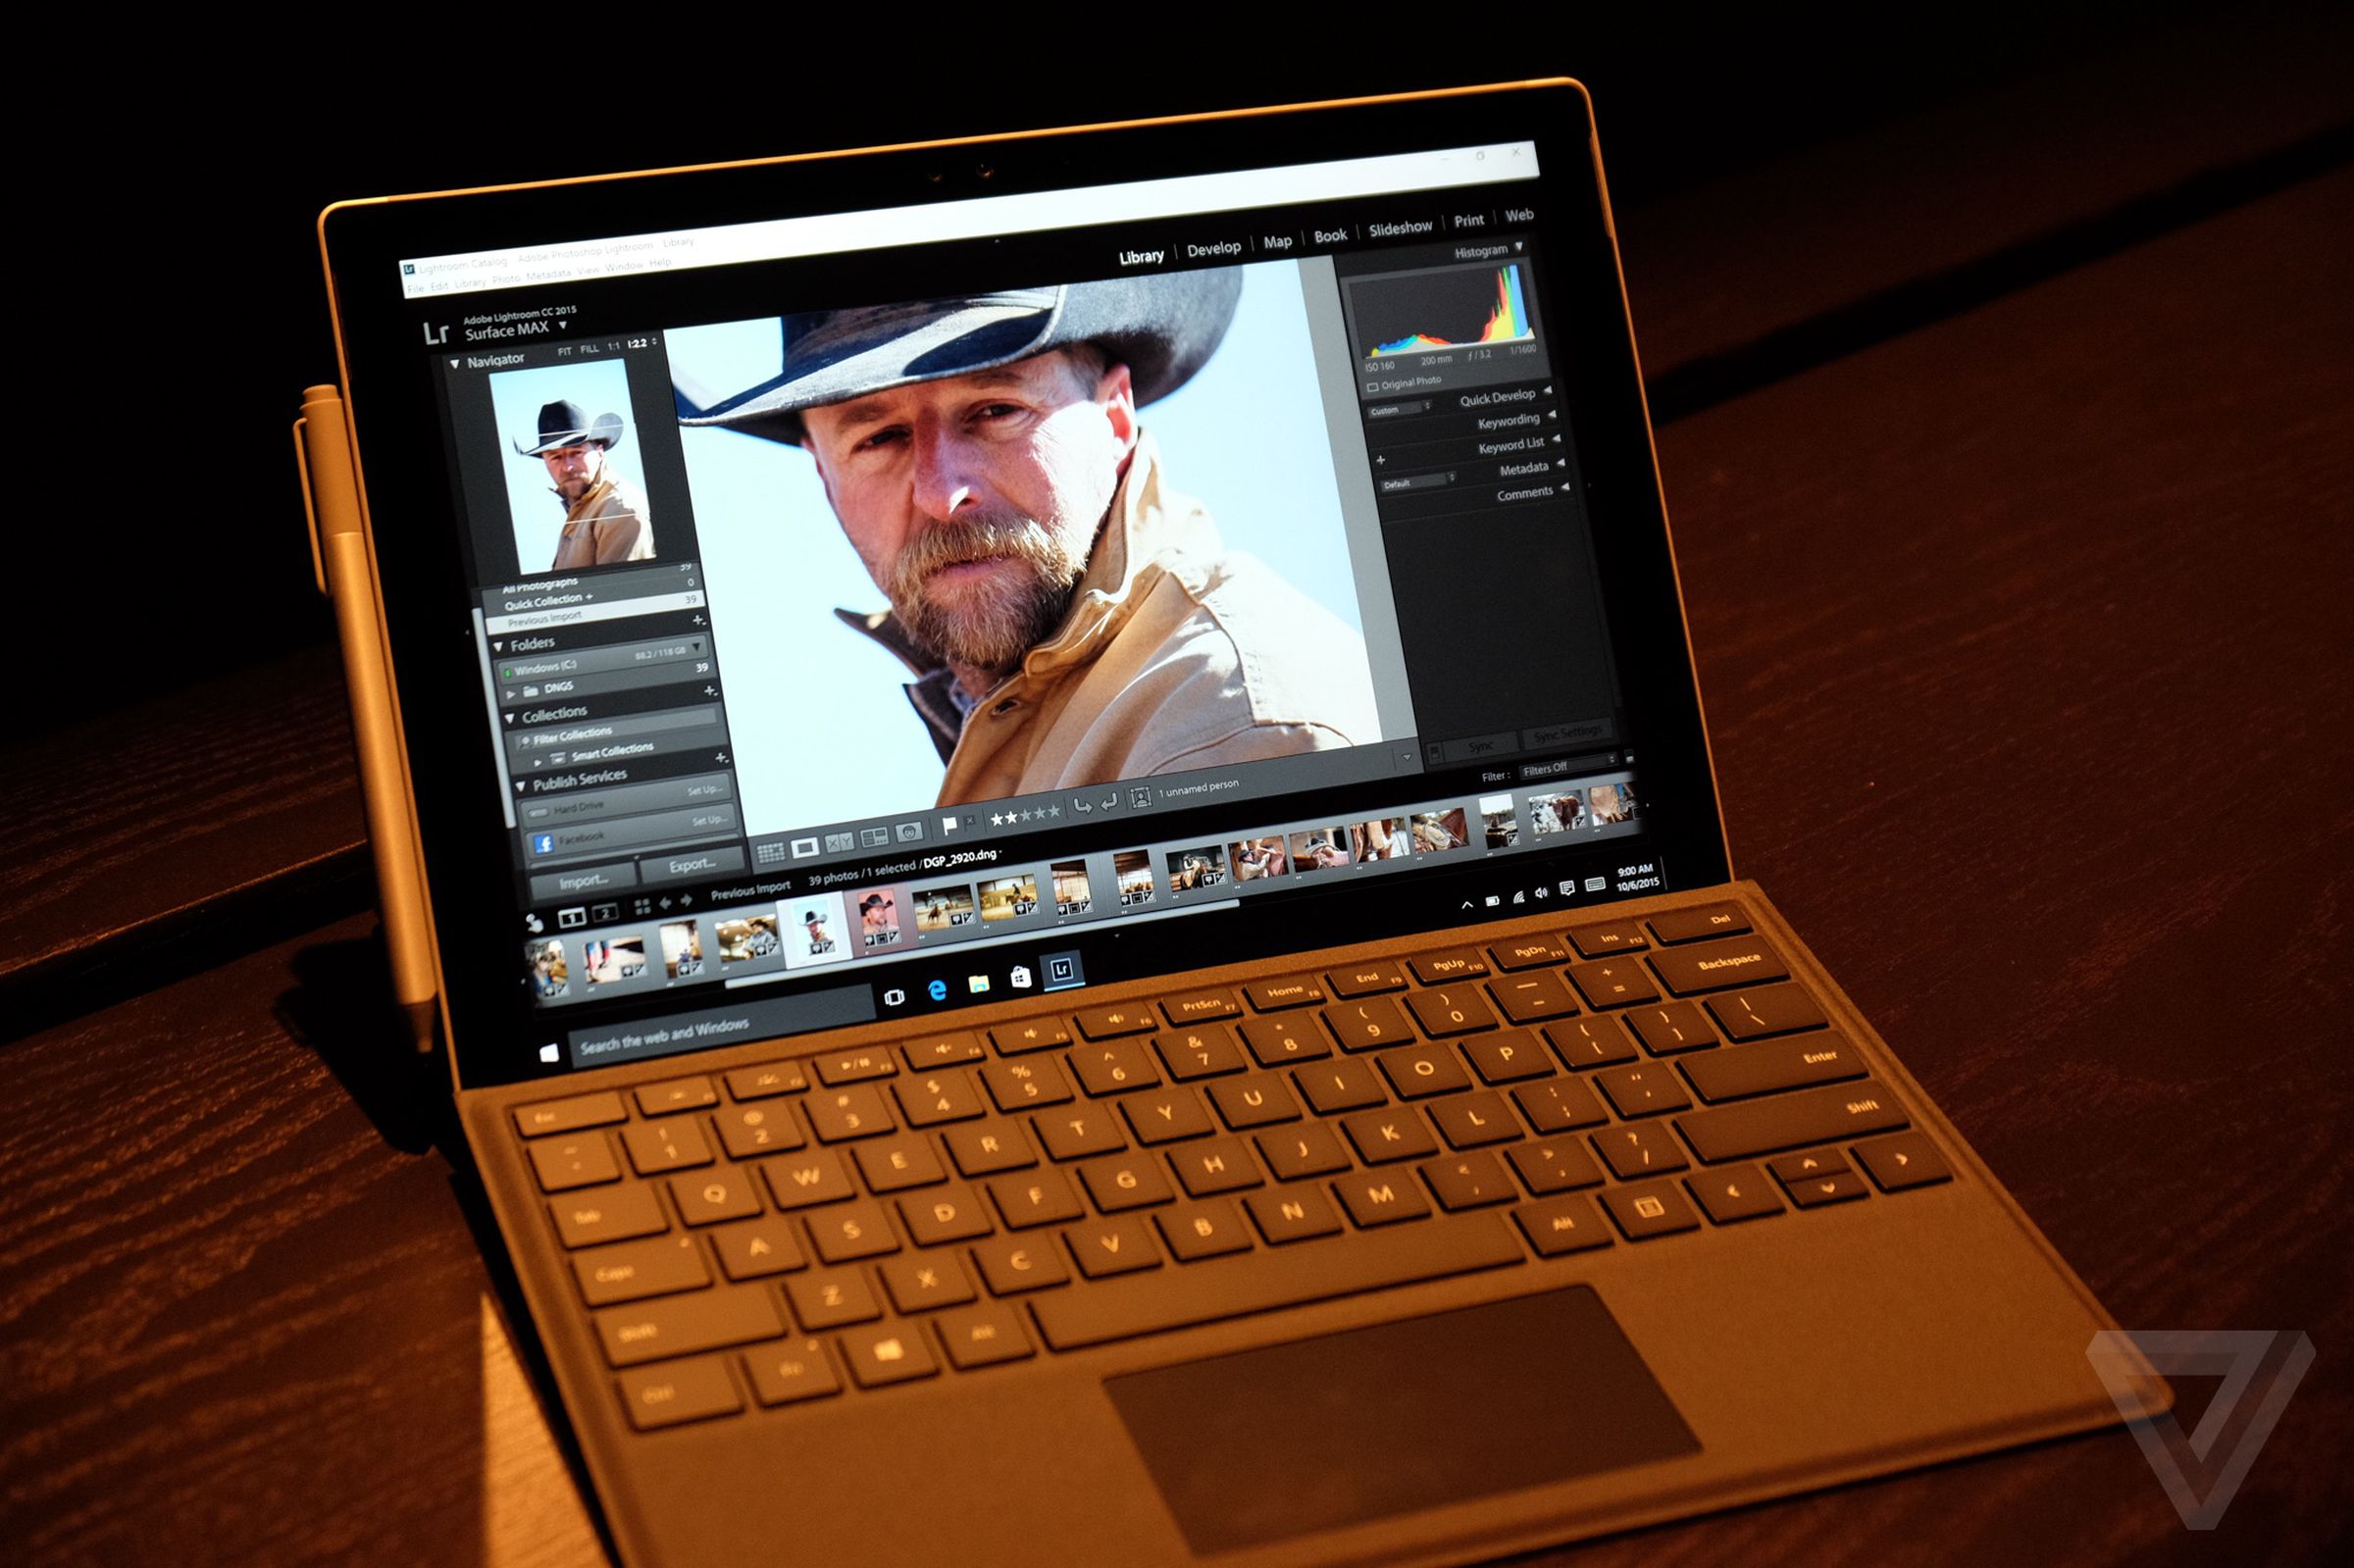 Microsoft Surface Pro 4 hands-on photos